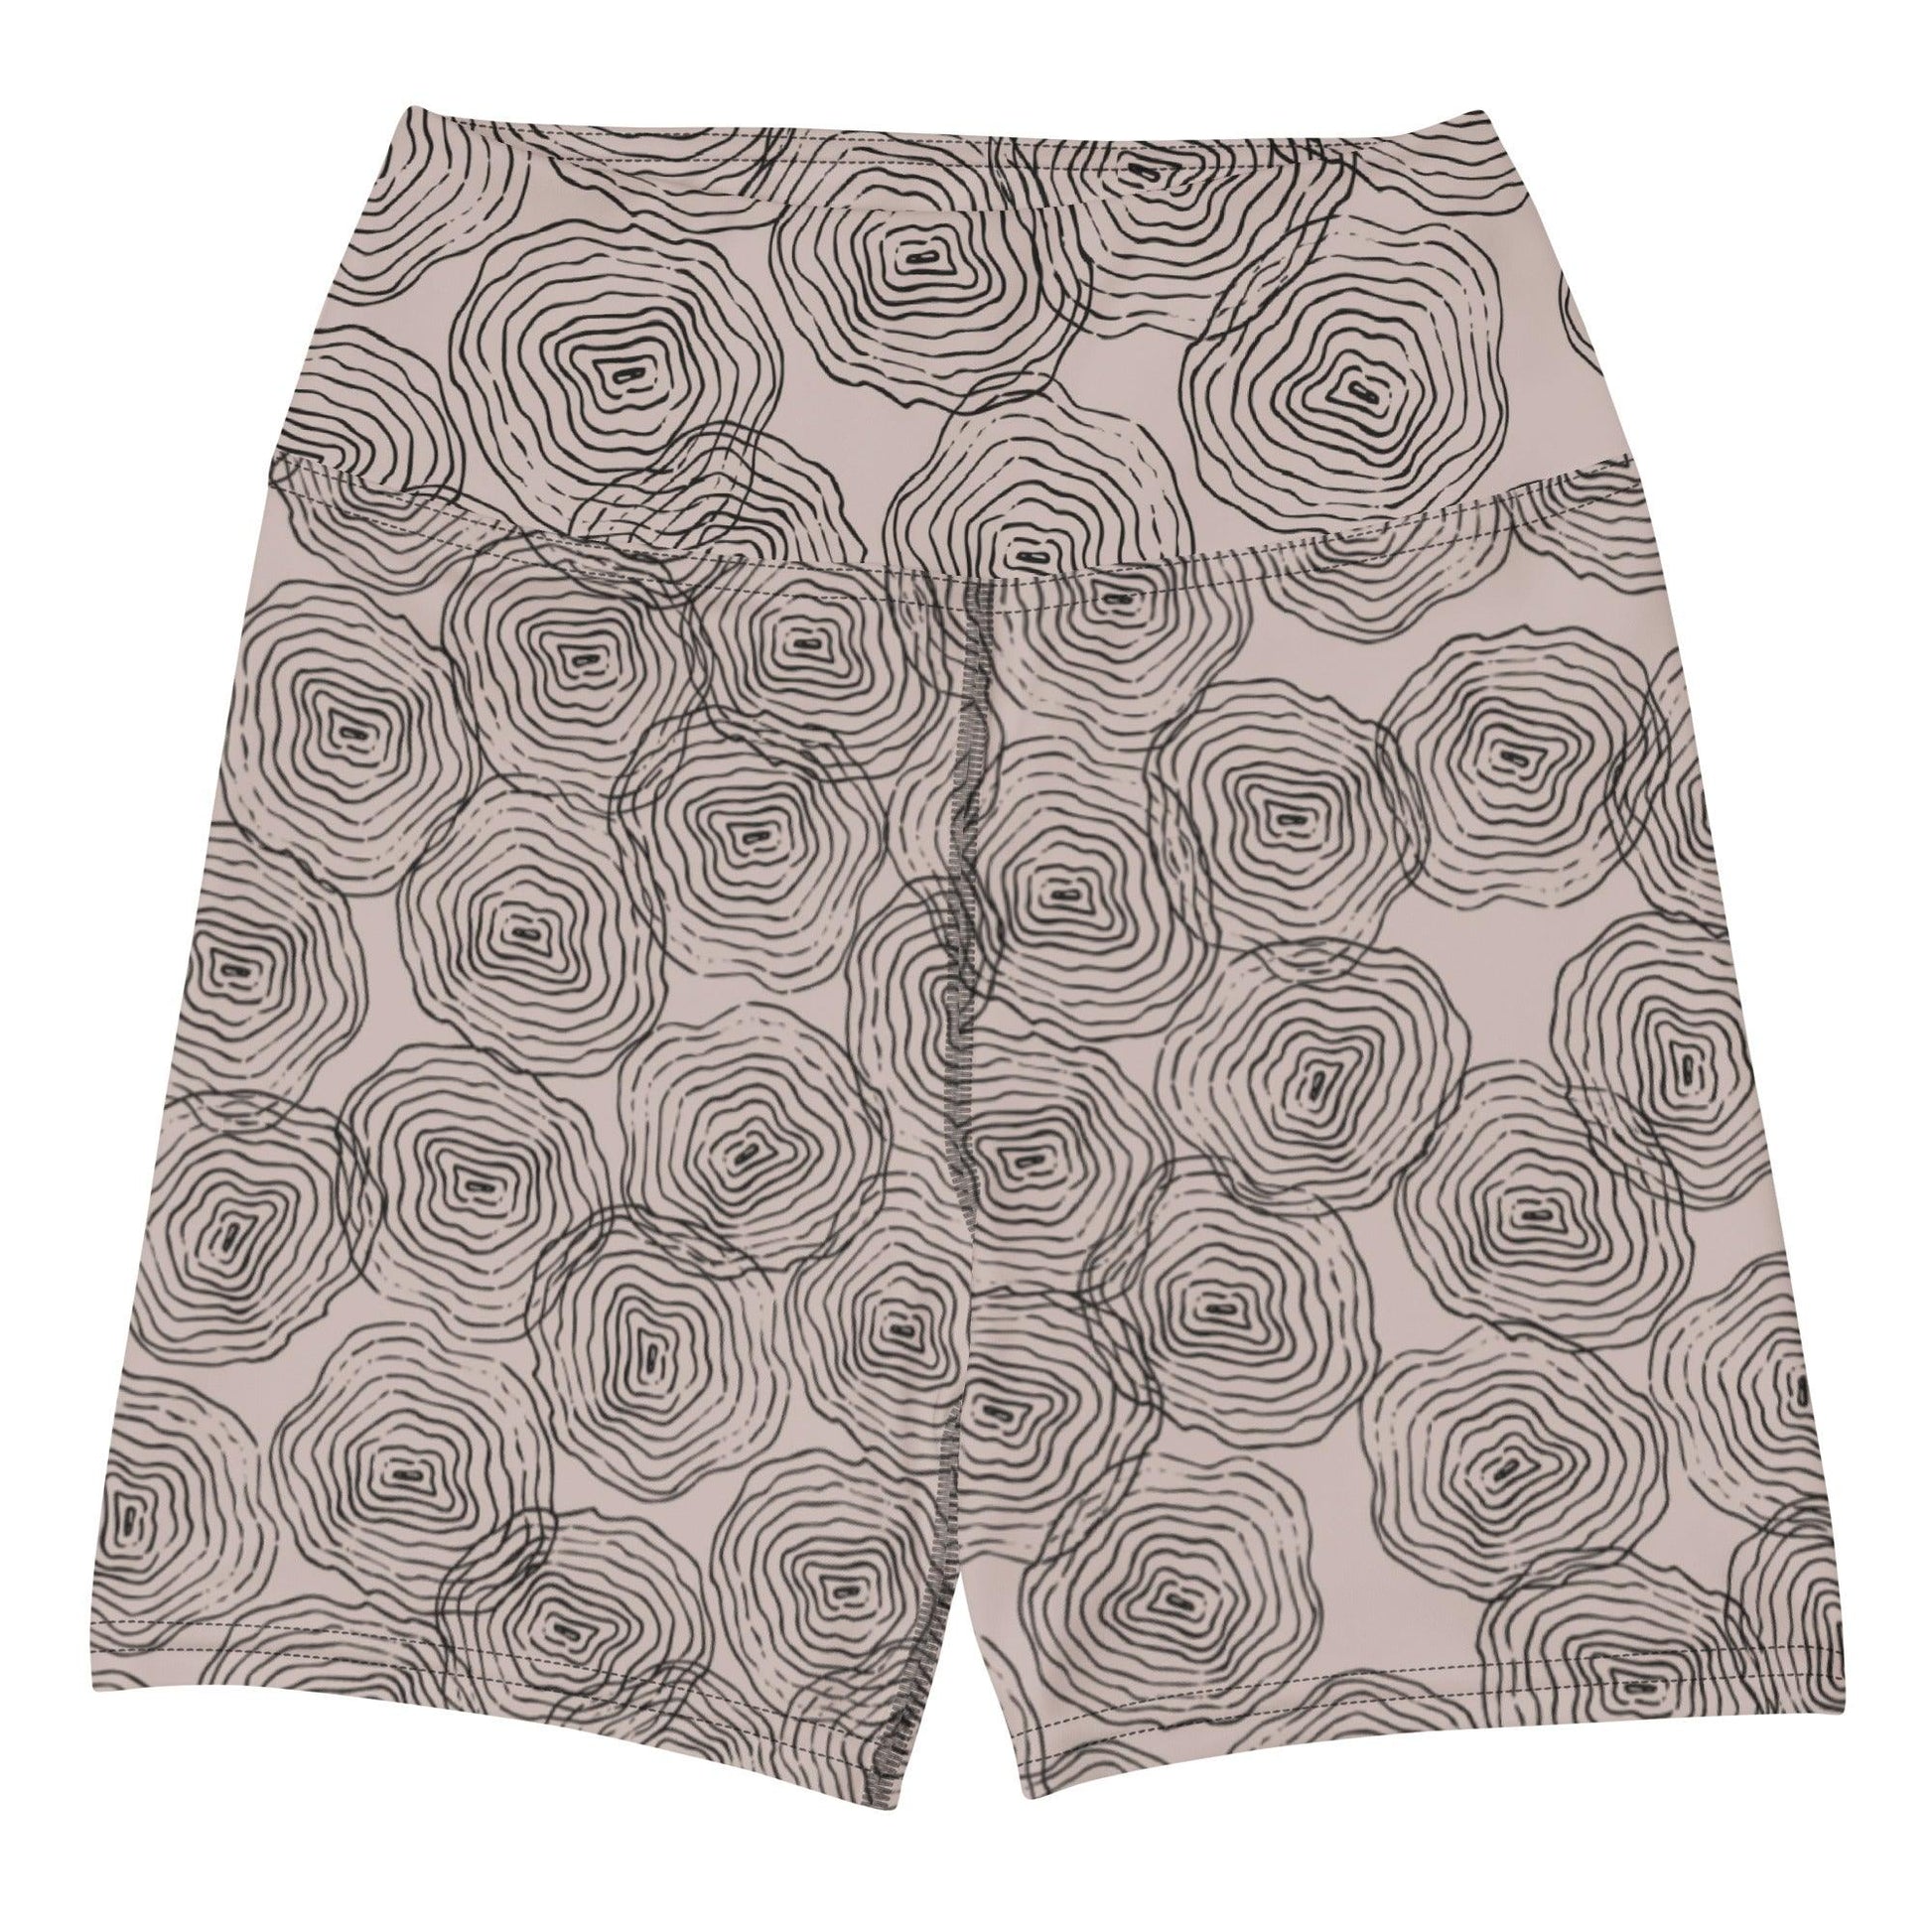 Ripple in Gray High Waisted Shorts - Solshine and Co